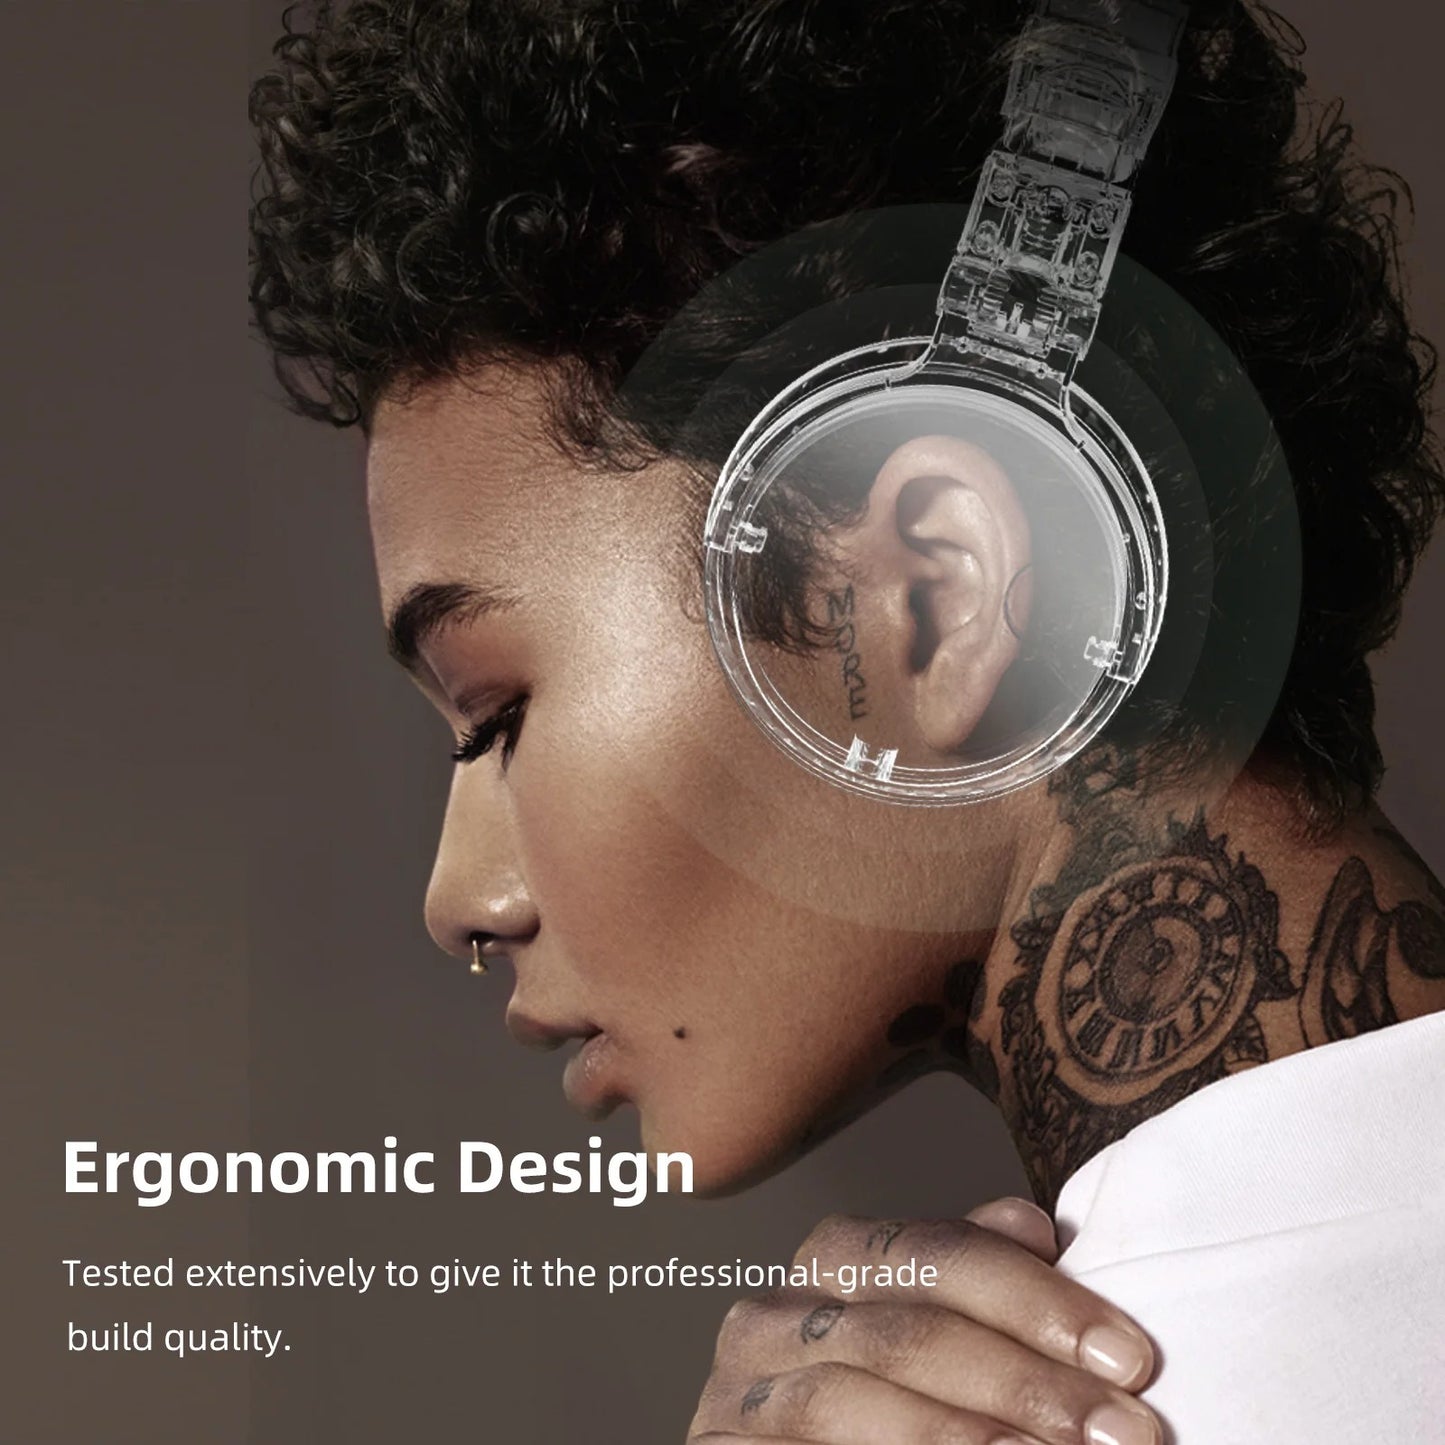 OneOdio Pro 10 Over Ear Wired DJ Studio Headphones with 3.5mm and 6.35mm Swappable AUX Jack Plugs, Foldable Body, Dynamic Bass, and SharePort Music Sharing for Instrument and Audio Mixing - Available in Colors